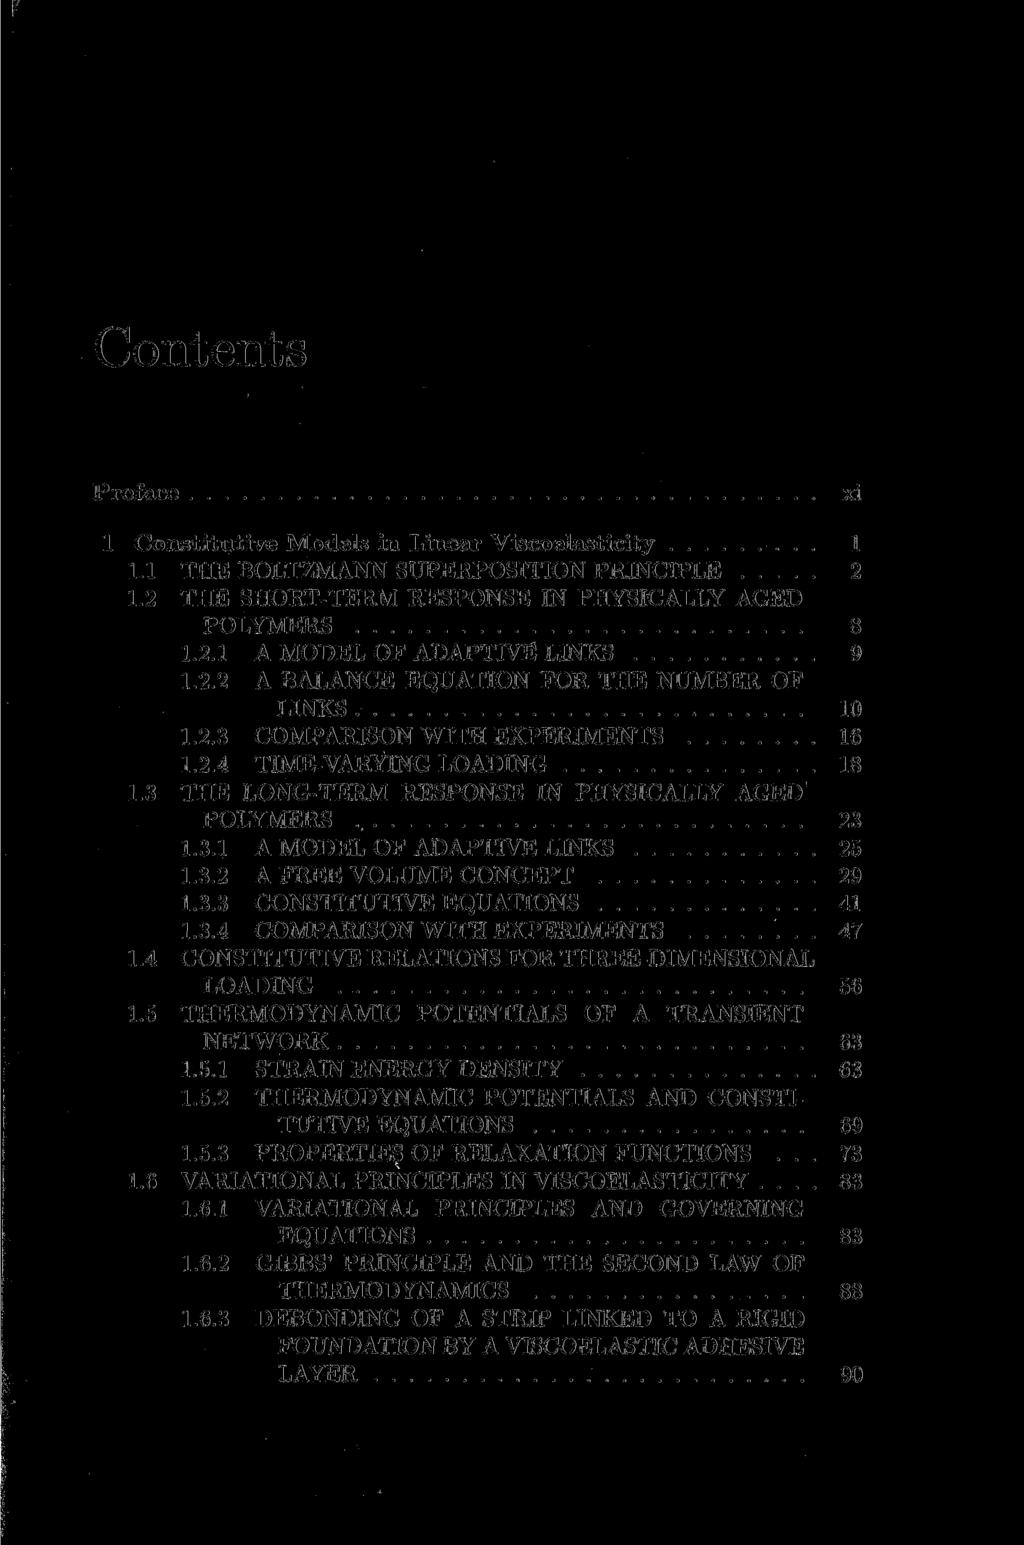 Contents Preface xi 1 Constitutive Models in Linear Viscoelasticity 1 1.1 THE BOLTZMANN SUPERPOSITION PRINCIPLE 2 1.2 THE SHORT-TERM RESPONSE IN PHYSICALLY AGED POLYMERS 8 1.2.1 A MODEL OF ADAPTIVE LINKS 9 1.